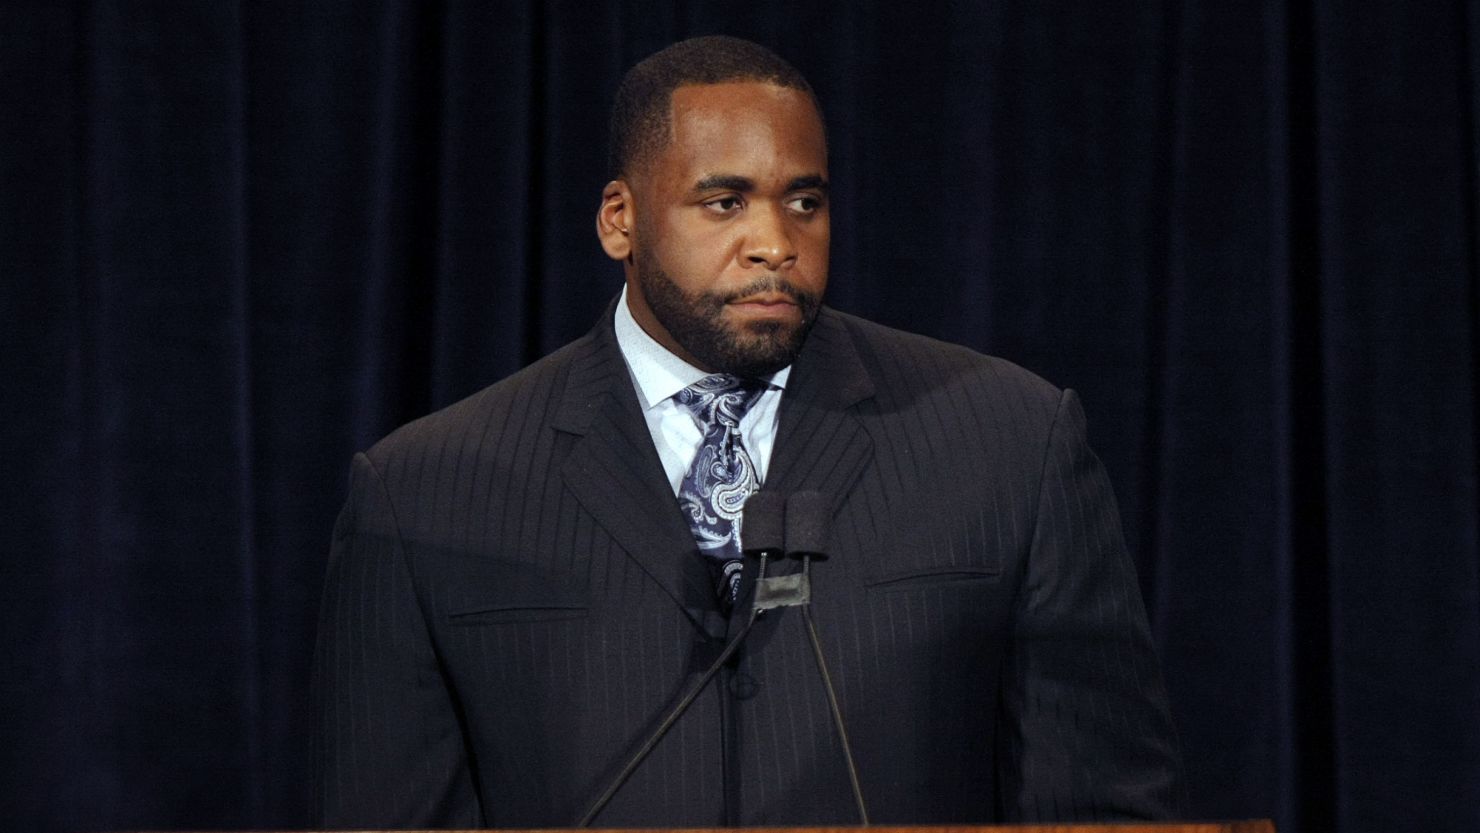 Jury selection in the trial of former Detroit Mayor Kwame Kilpatrick kicked off Thursday.